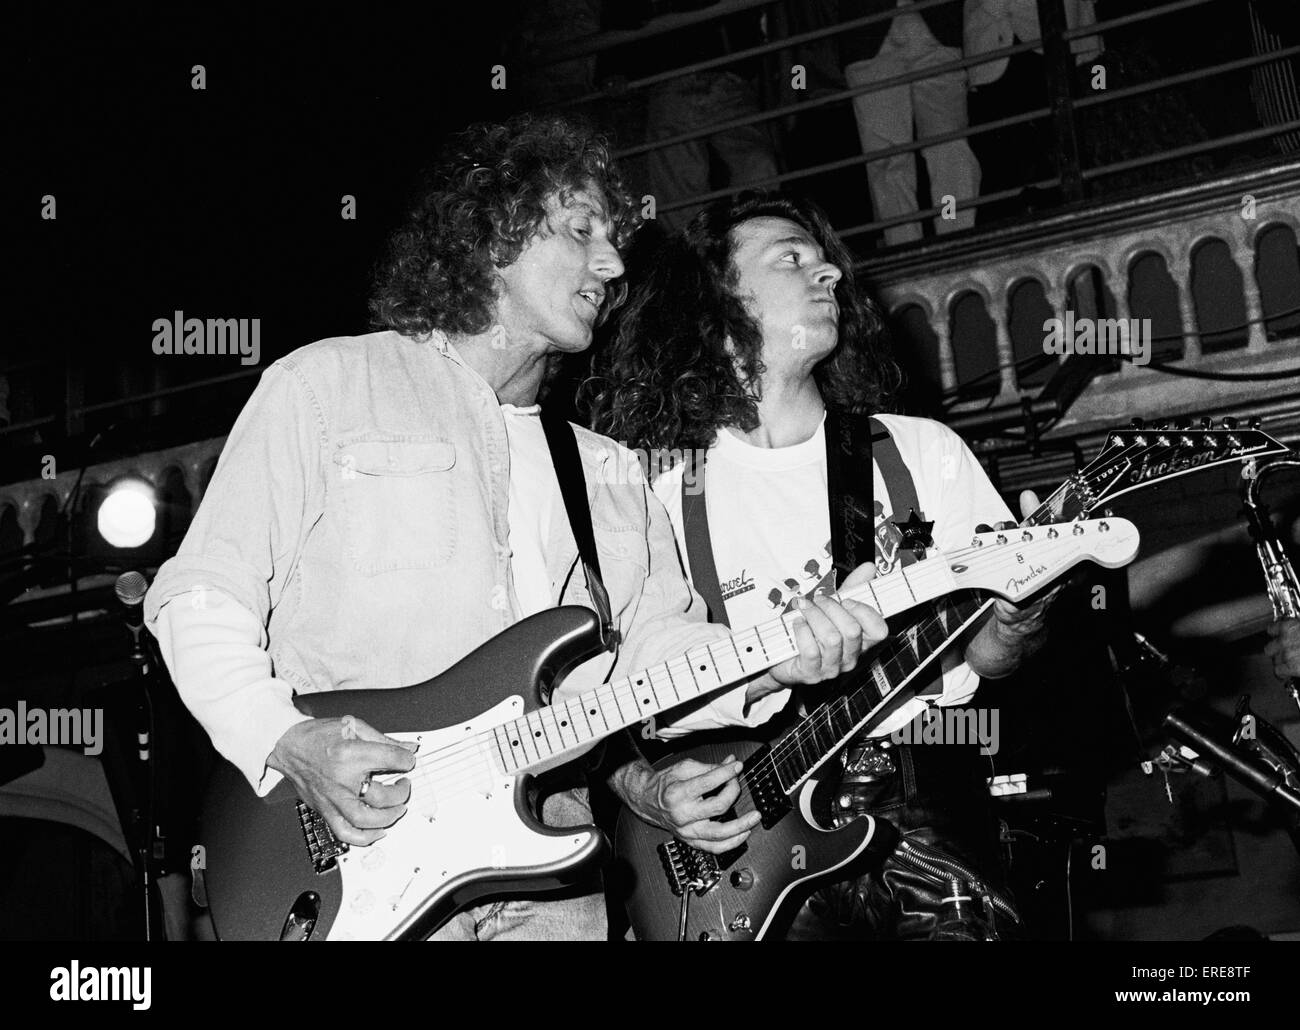 Roger Daltrey (b. 1944), lead singer with English band The Who, playing electric guitar at a private gig at the Limelight club, Stock Photo